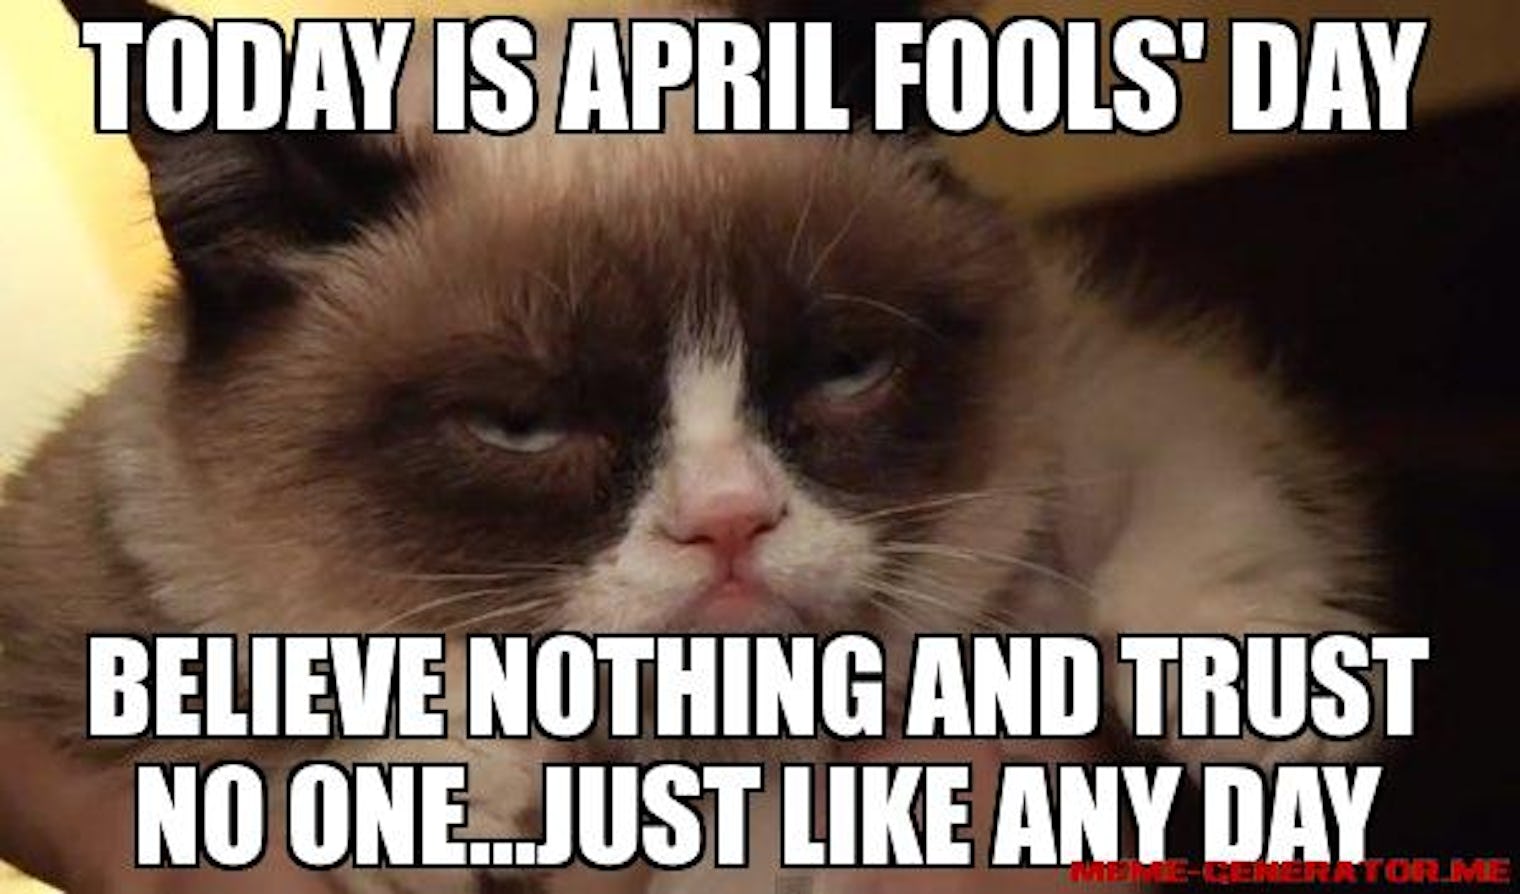 15 April Fools' Day Memes To Help You Prepare For This Day Of Pranks